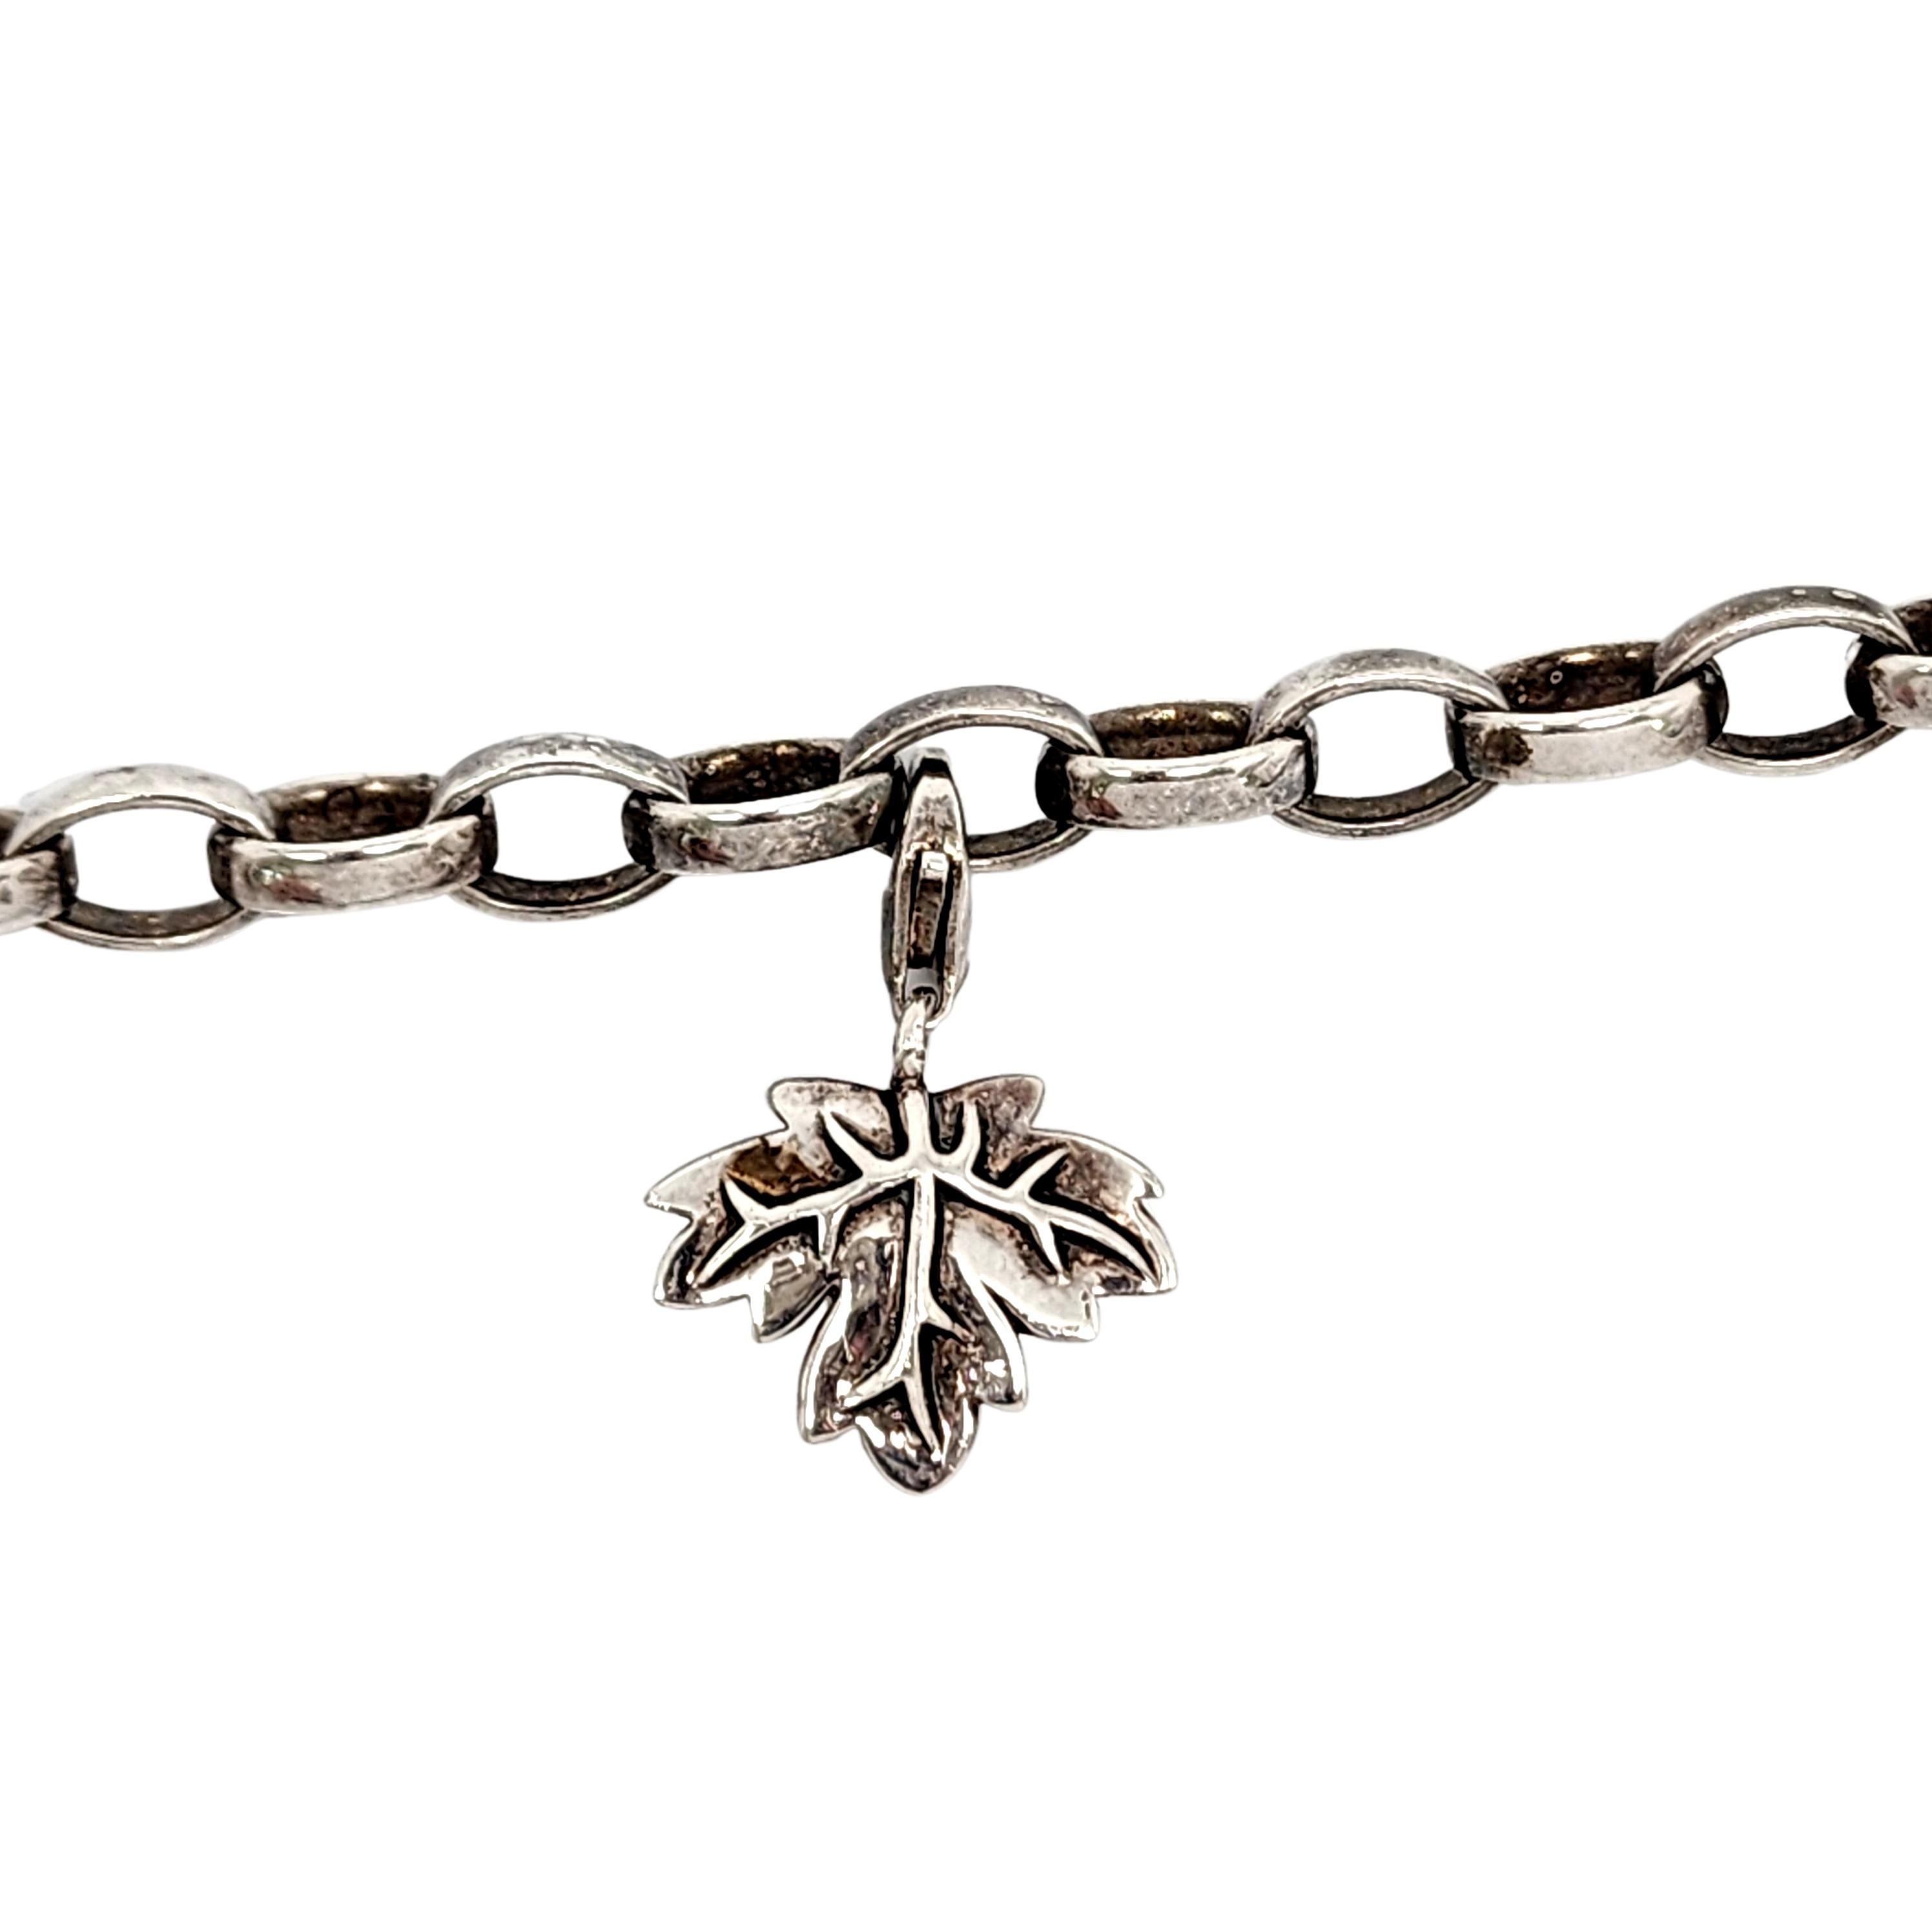 Thomas Sabo Charm Club SS Bracelet with Soccer Ball and Leaf Charms #14459 For Sale 1